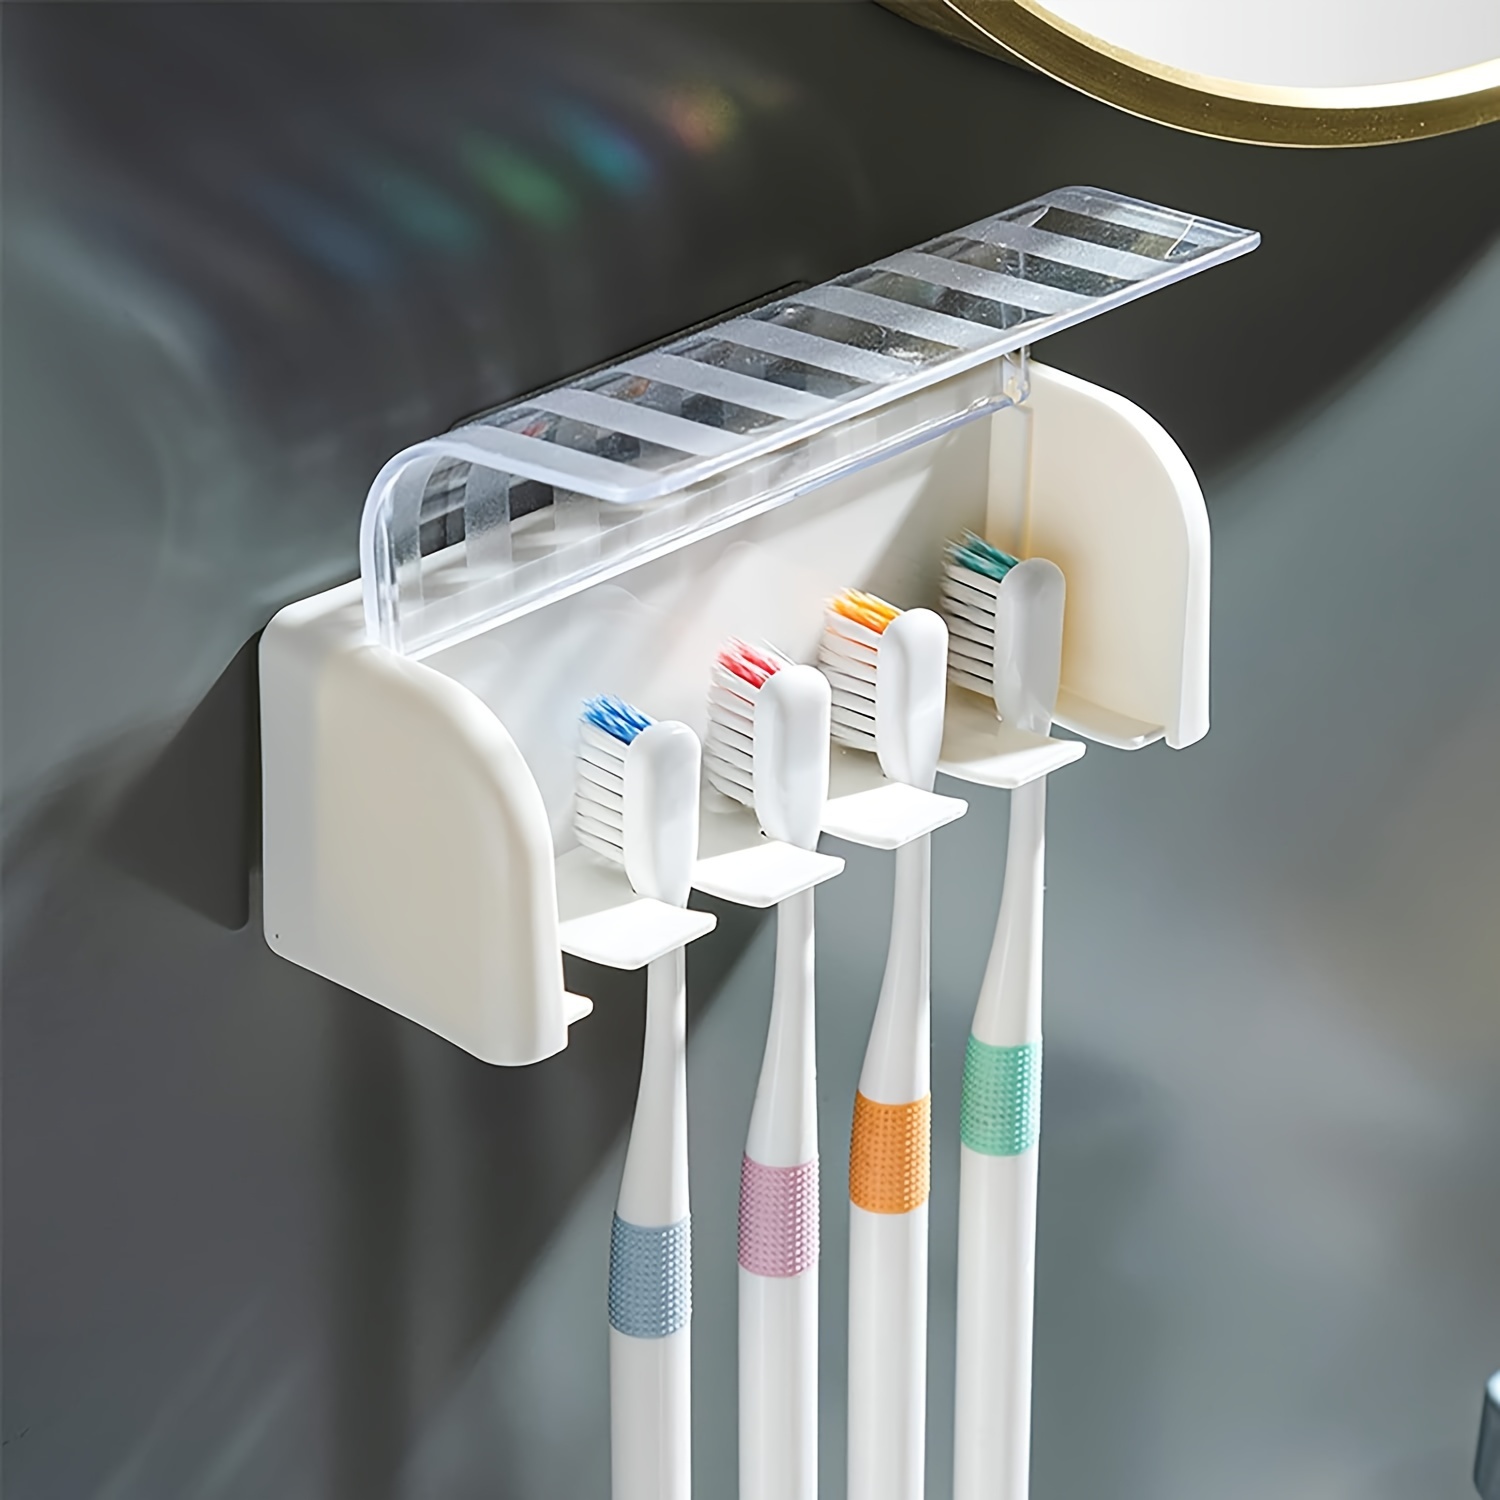 

1pc 5-slot Toothbrush Holder With Lid, Self-adhesive Toothbrush Storage Organizer, Perfect For Dorm Bathrooms And Showers, Can Hold 5 Toothbrushes